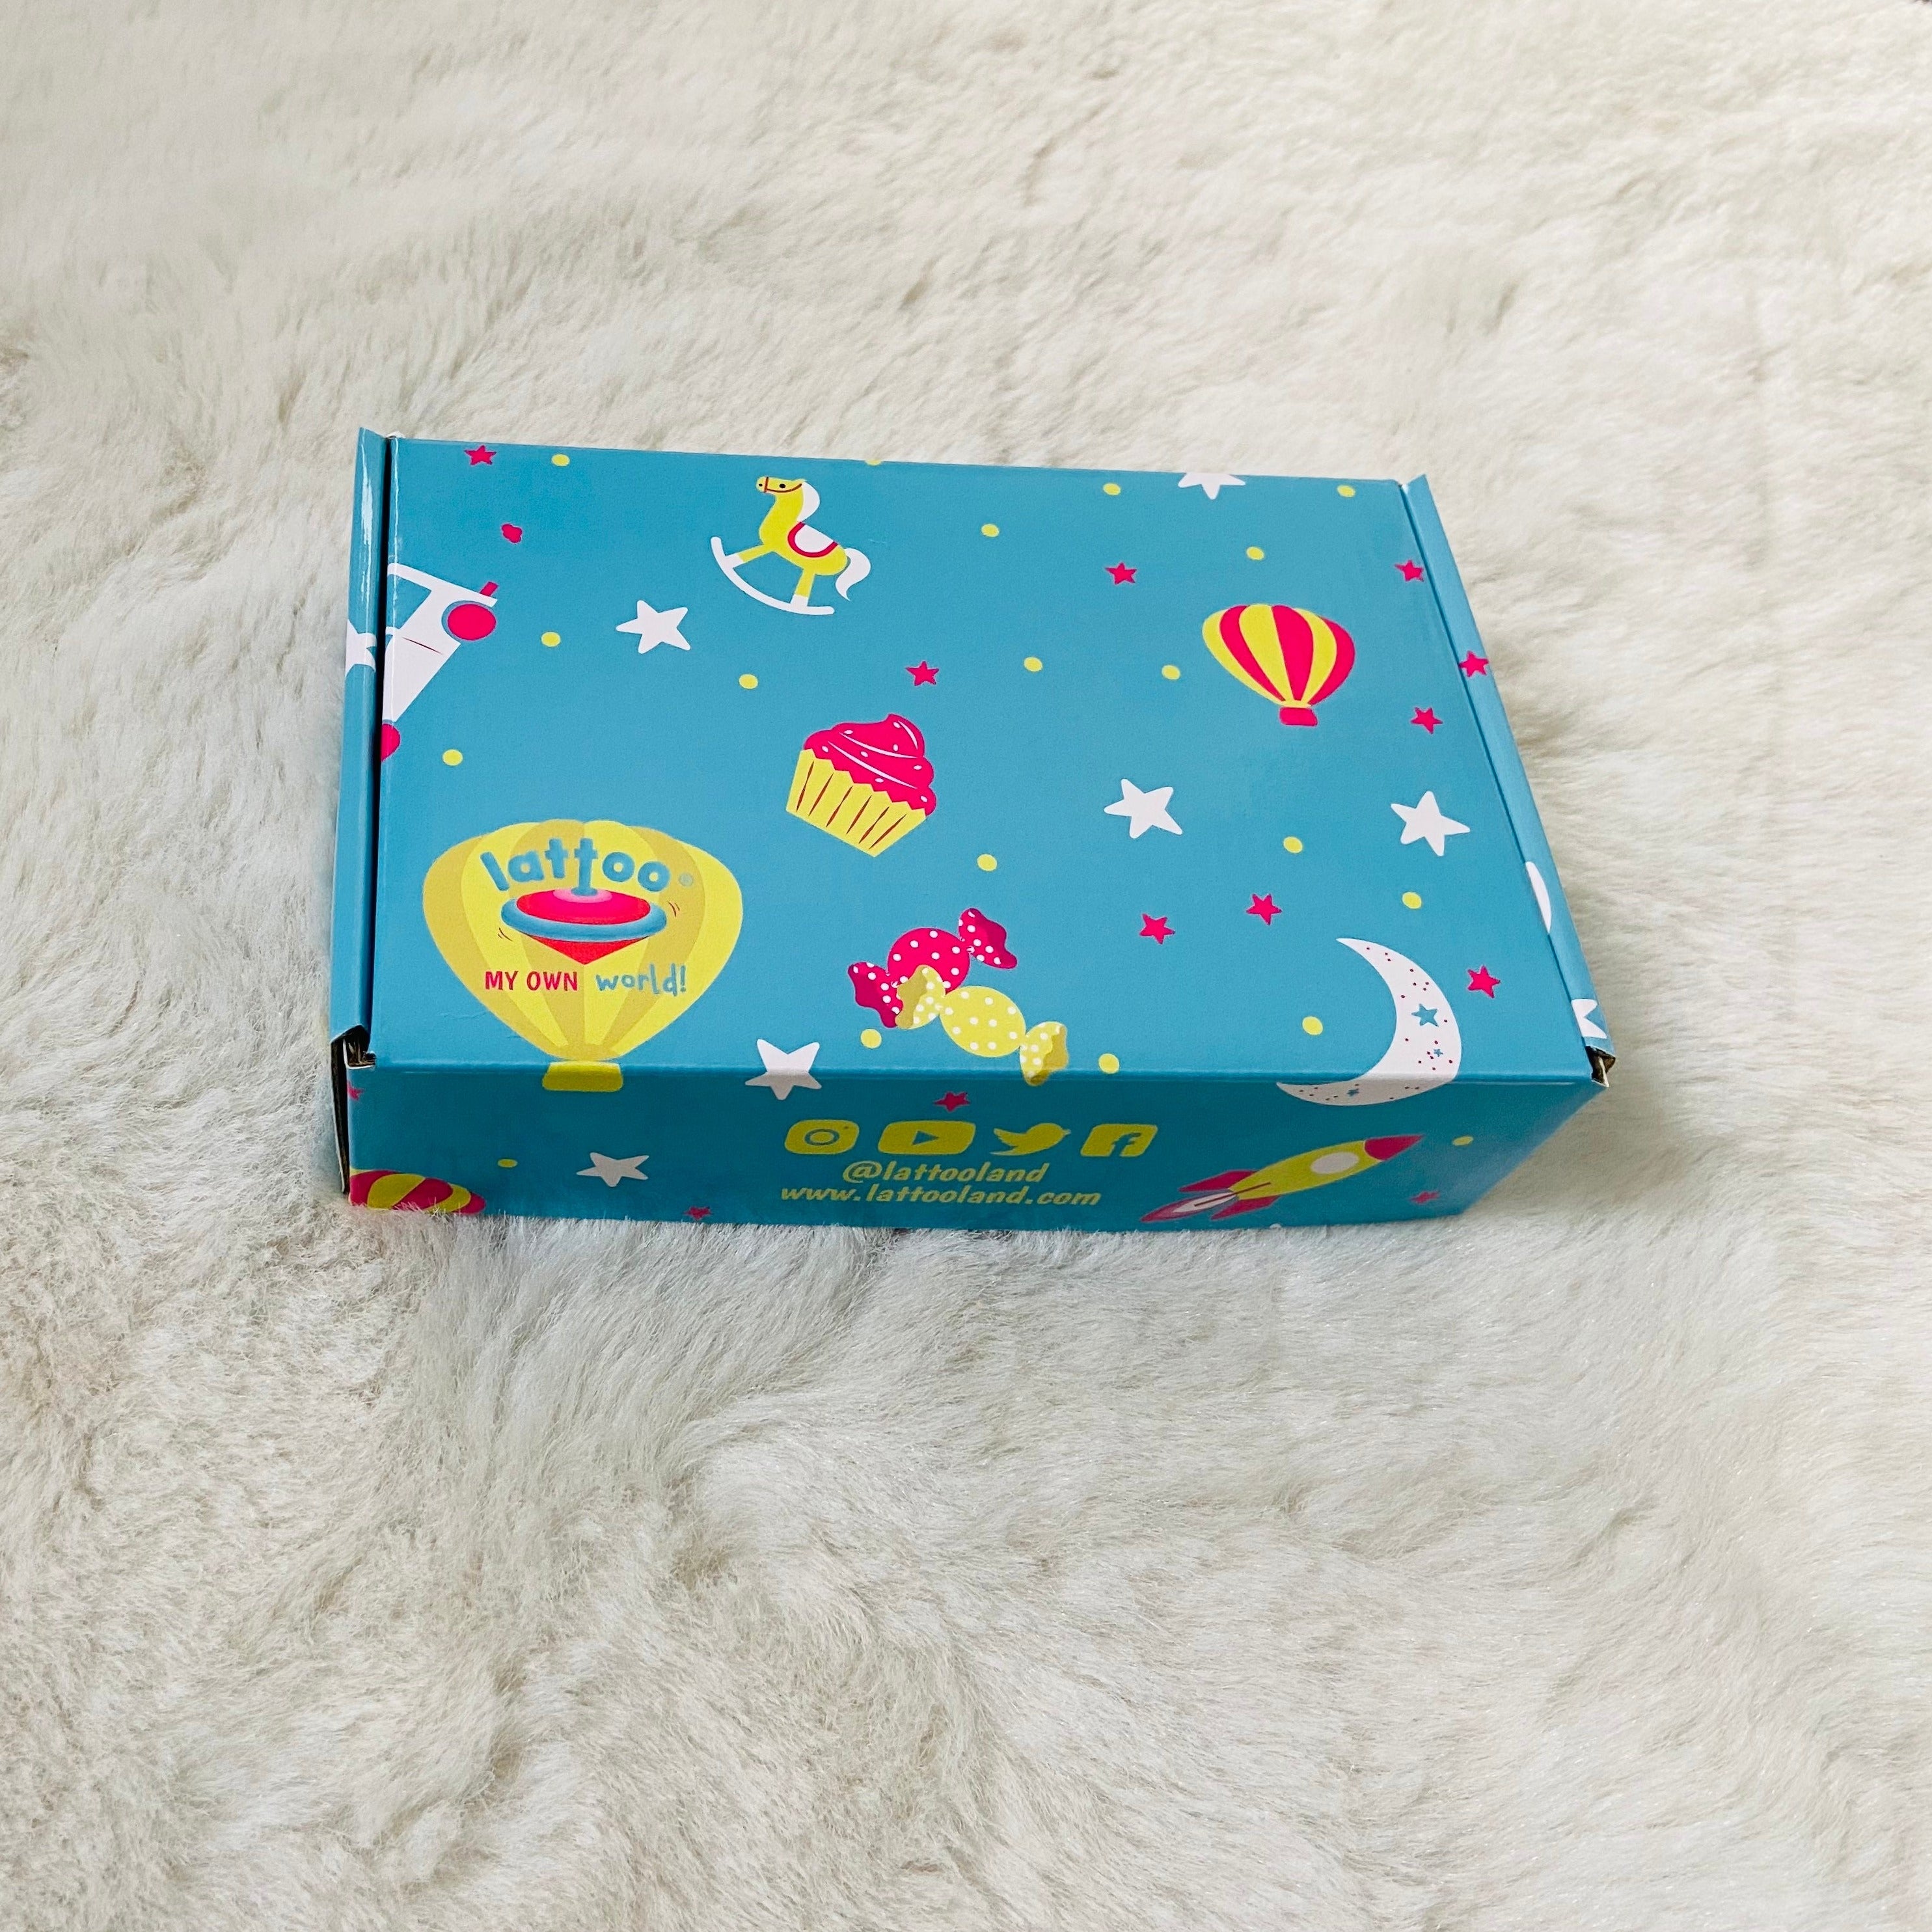  Lattoo Packaging box in Turquoise color